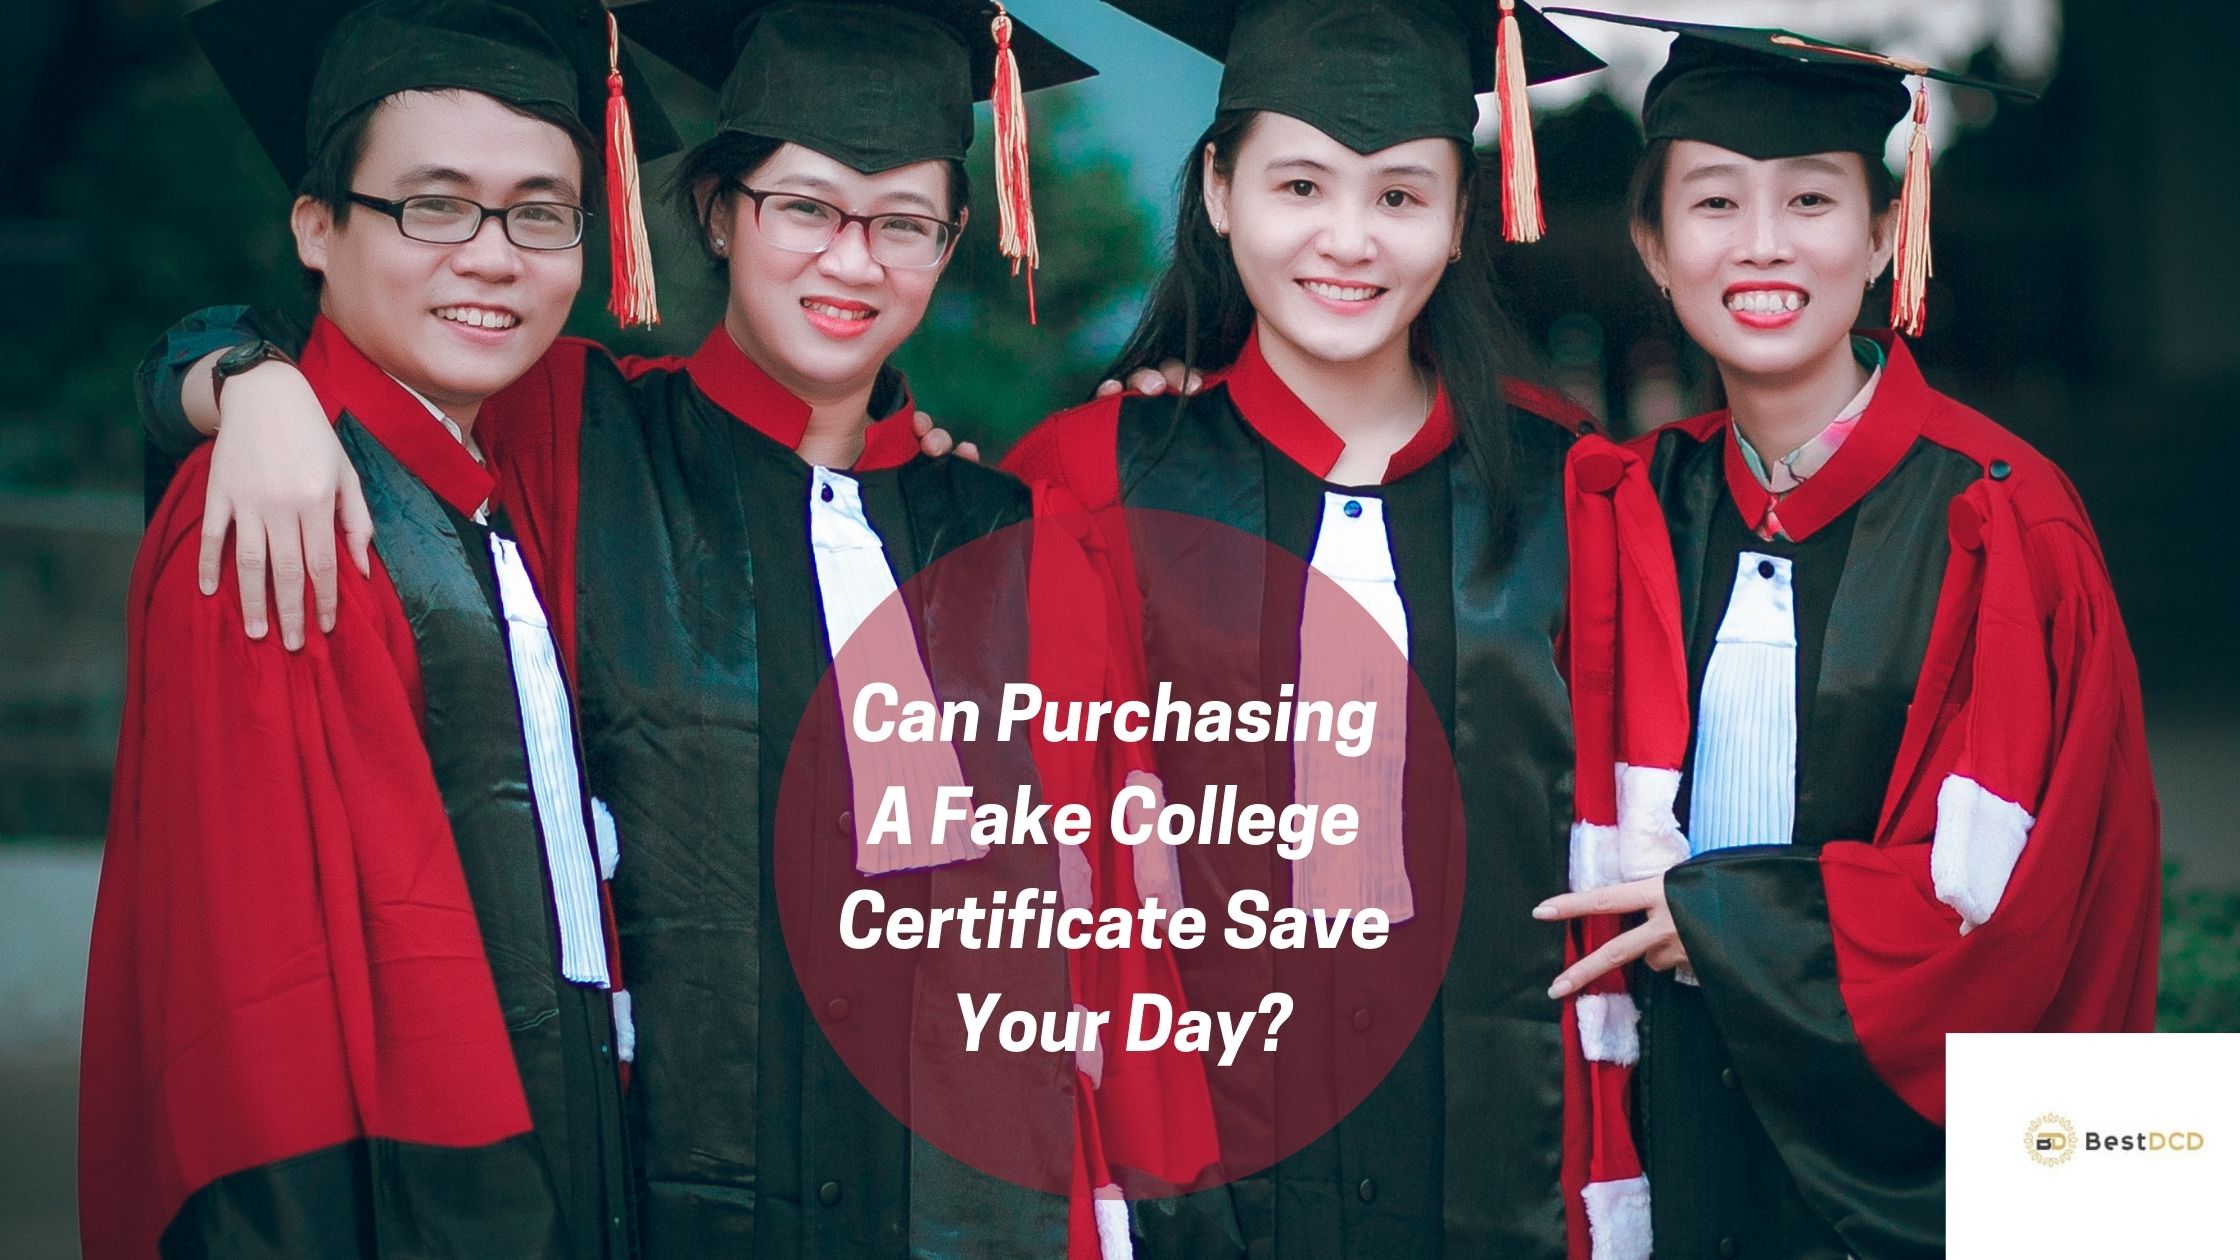 Can Purchasing A Fake College Certificate Save Your Day?